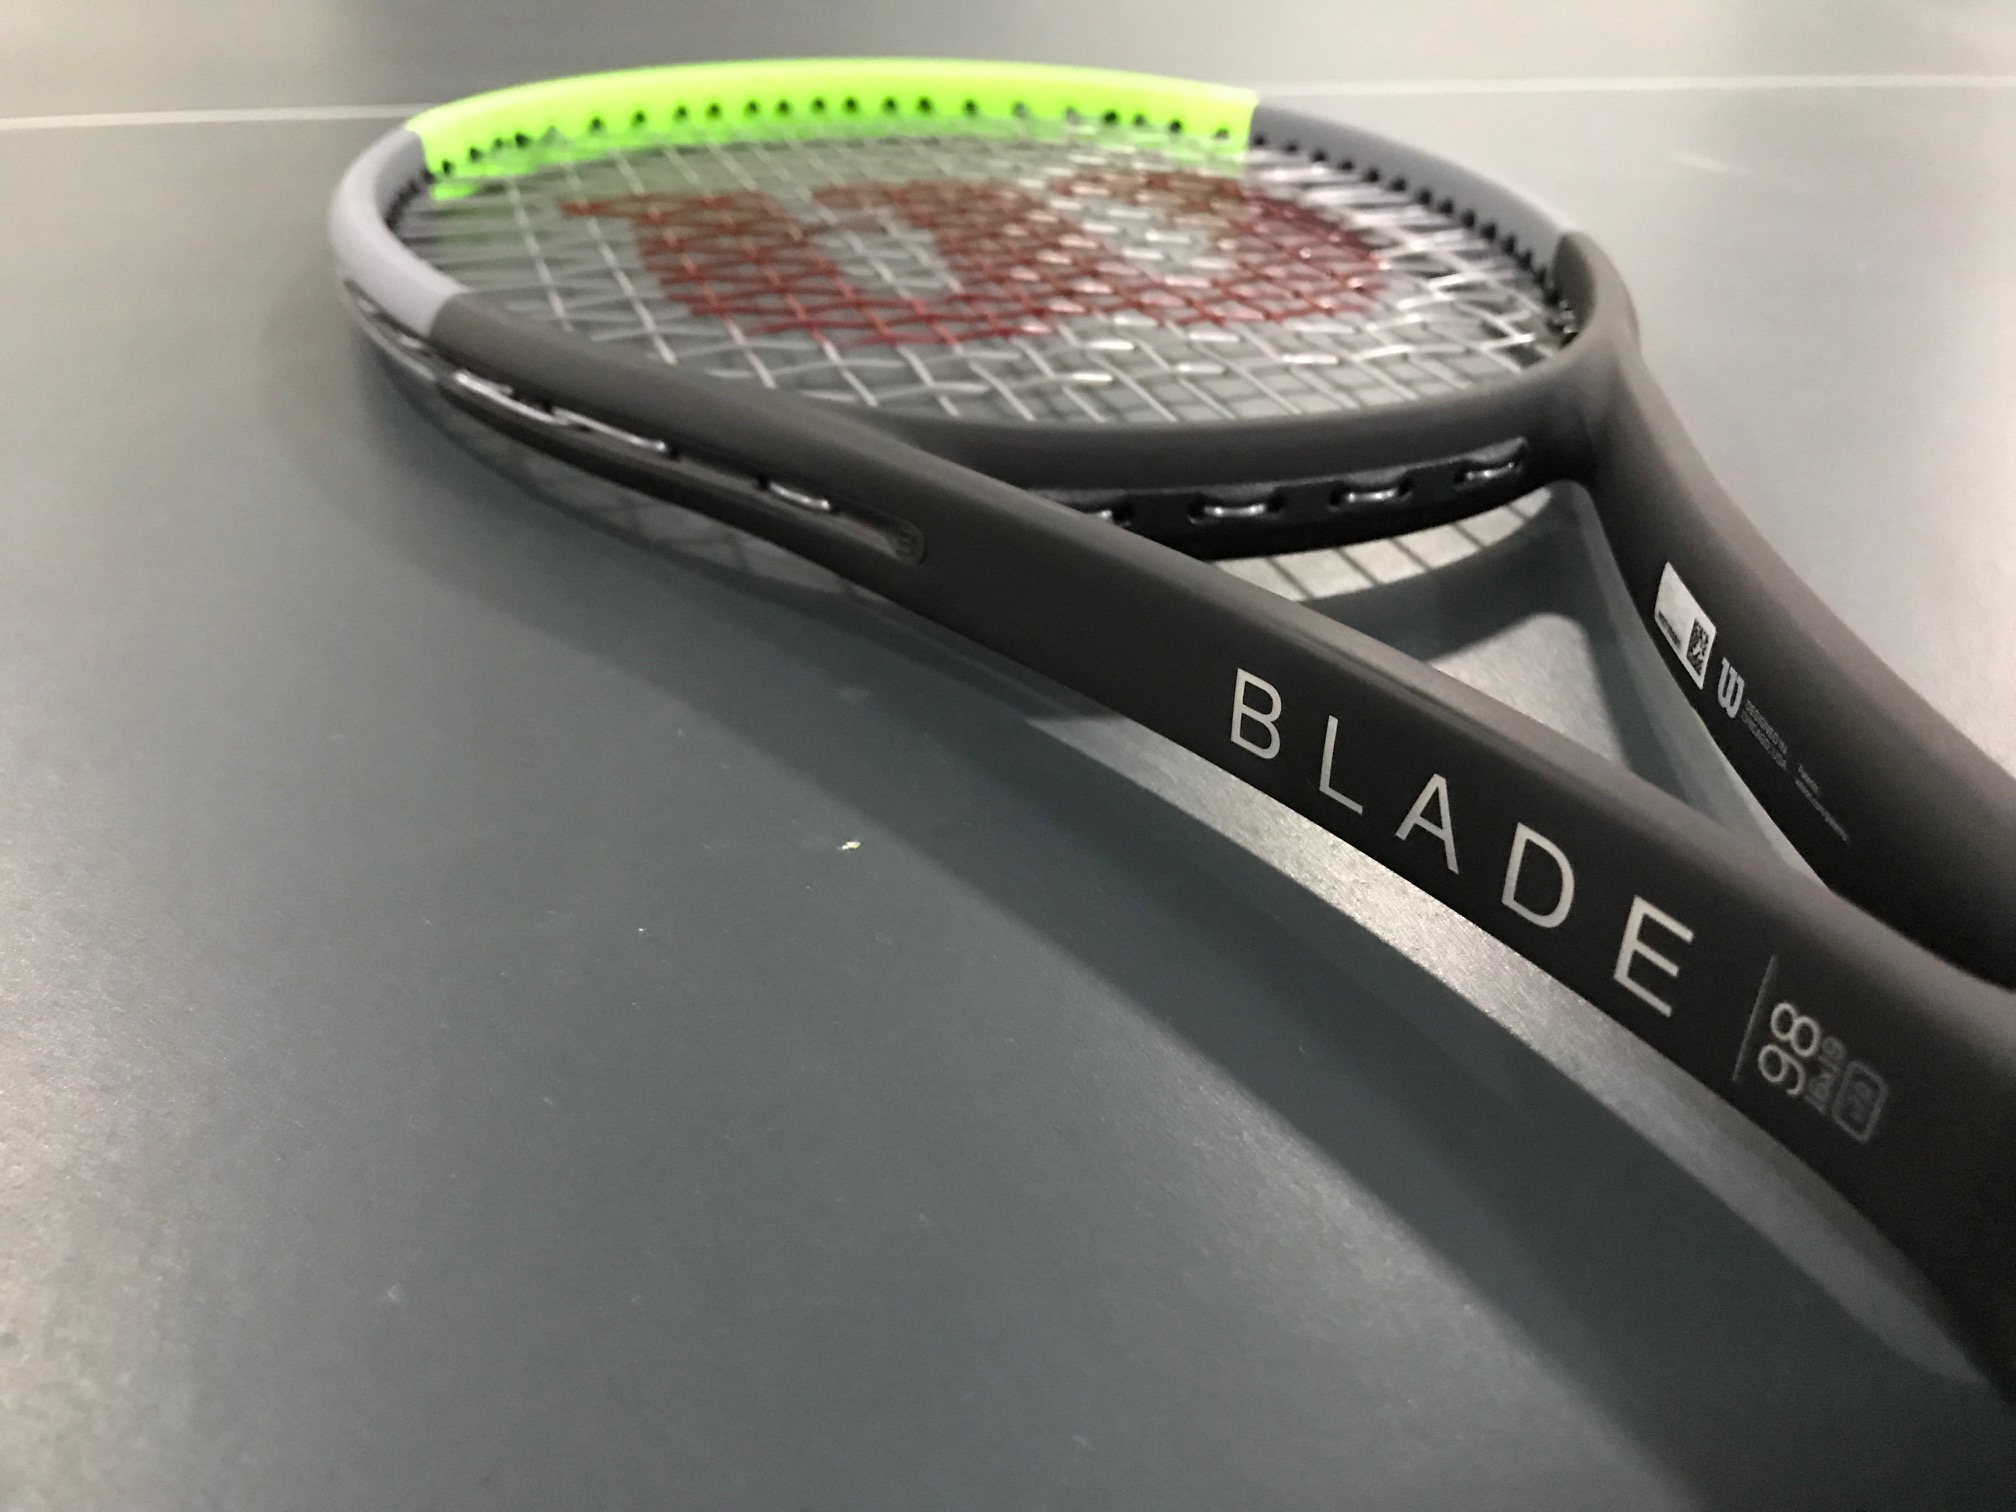 18X20 Details about   NEW BLADE 98 PRO TENNIS RACKET Grip Size: 4 1/8, 1/4, 3/8 1/2" 